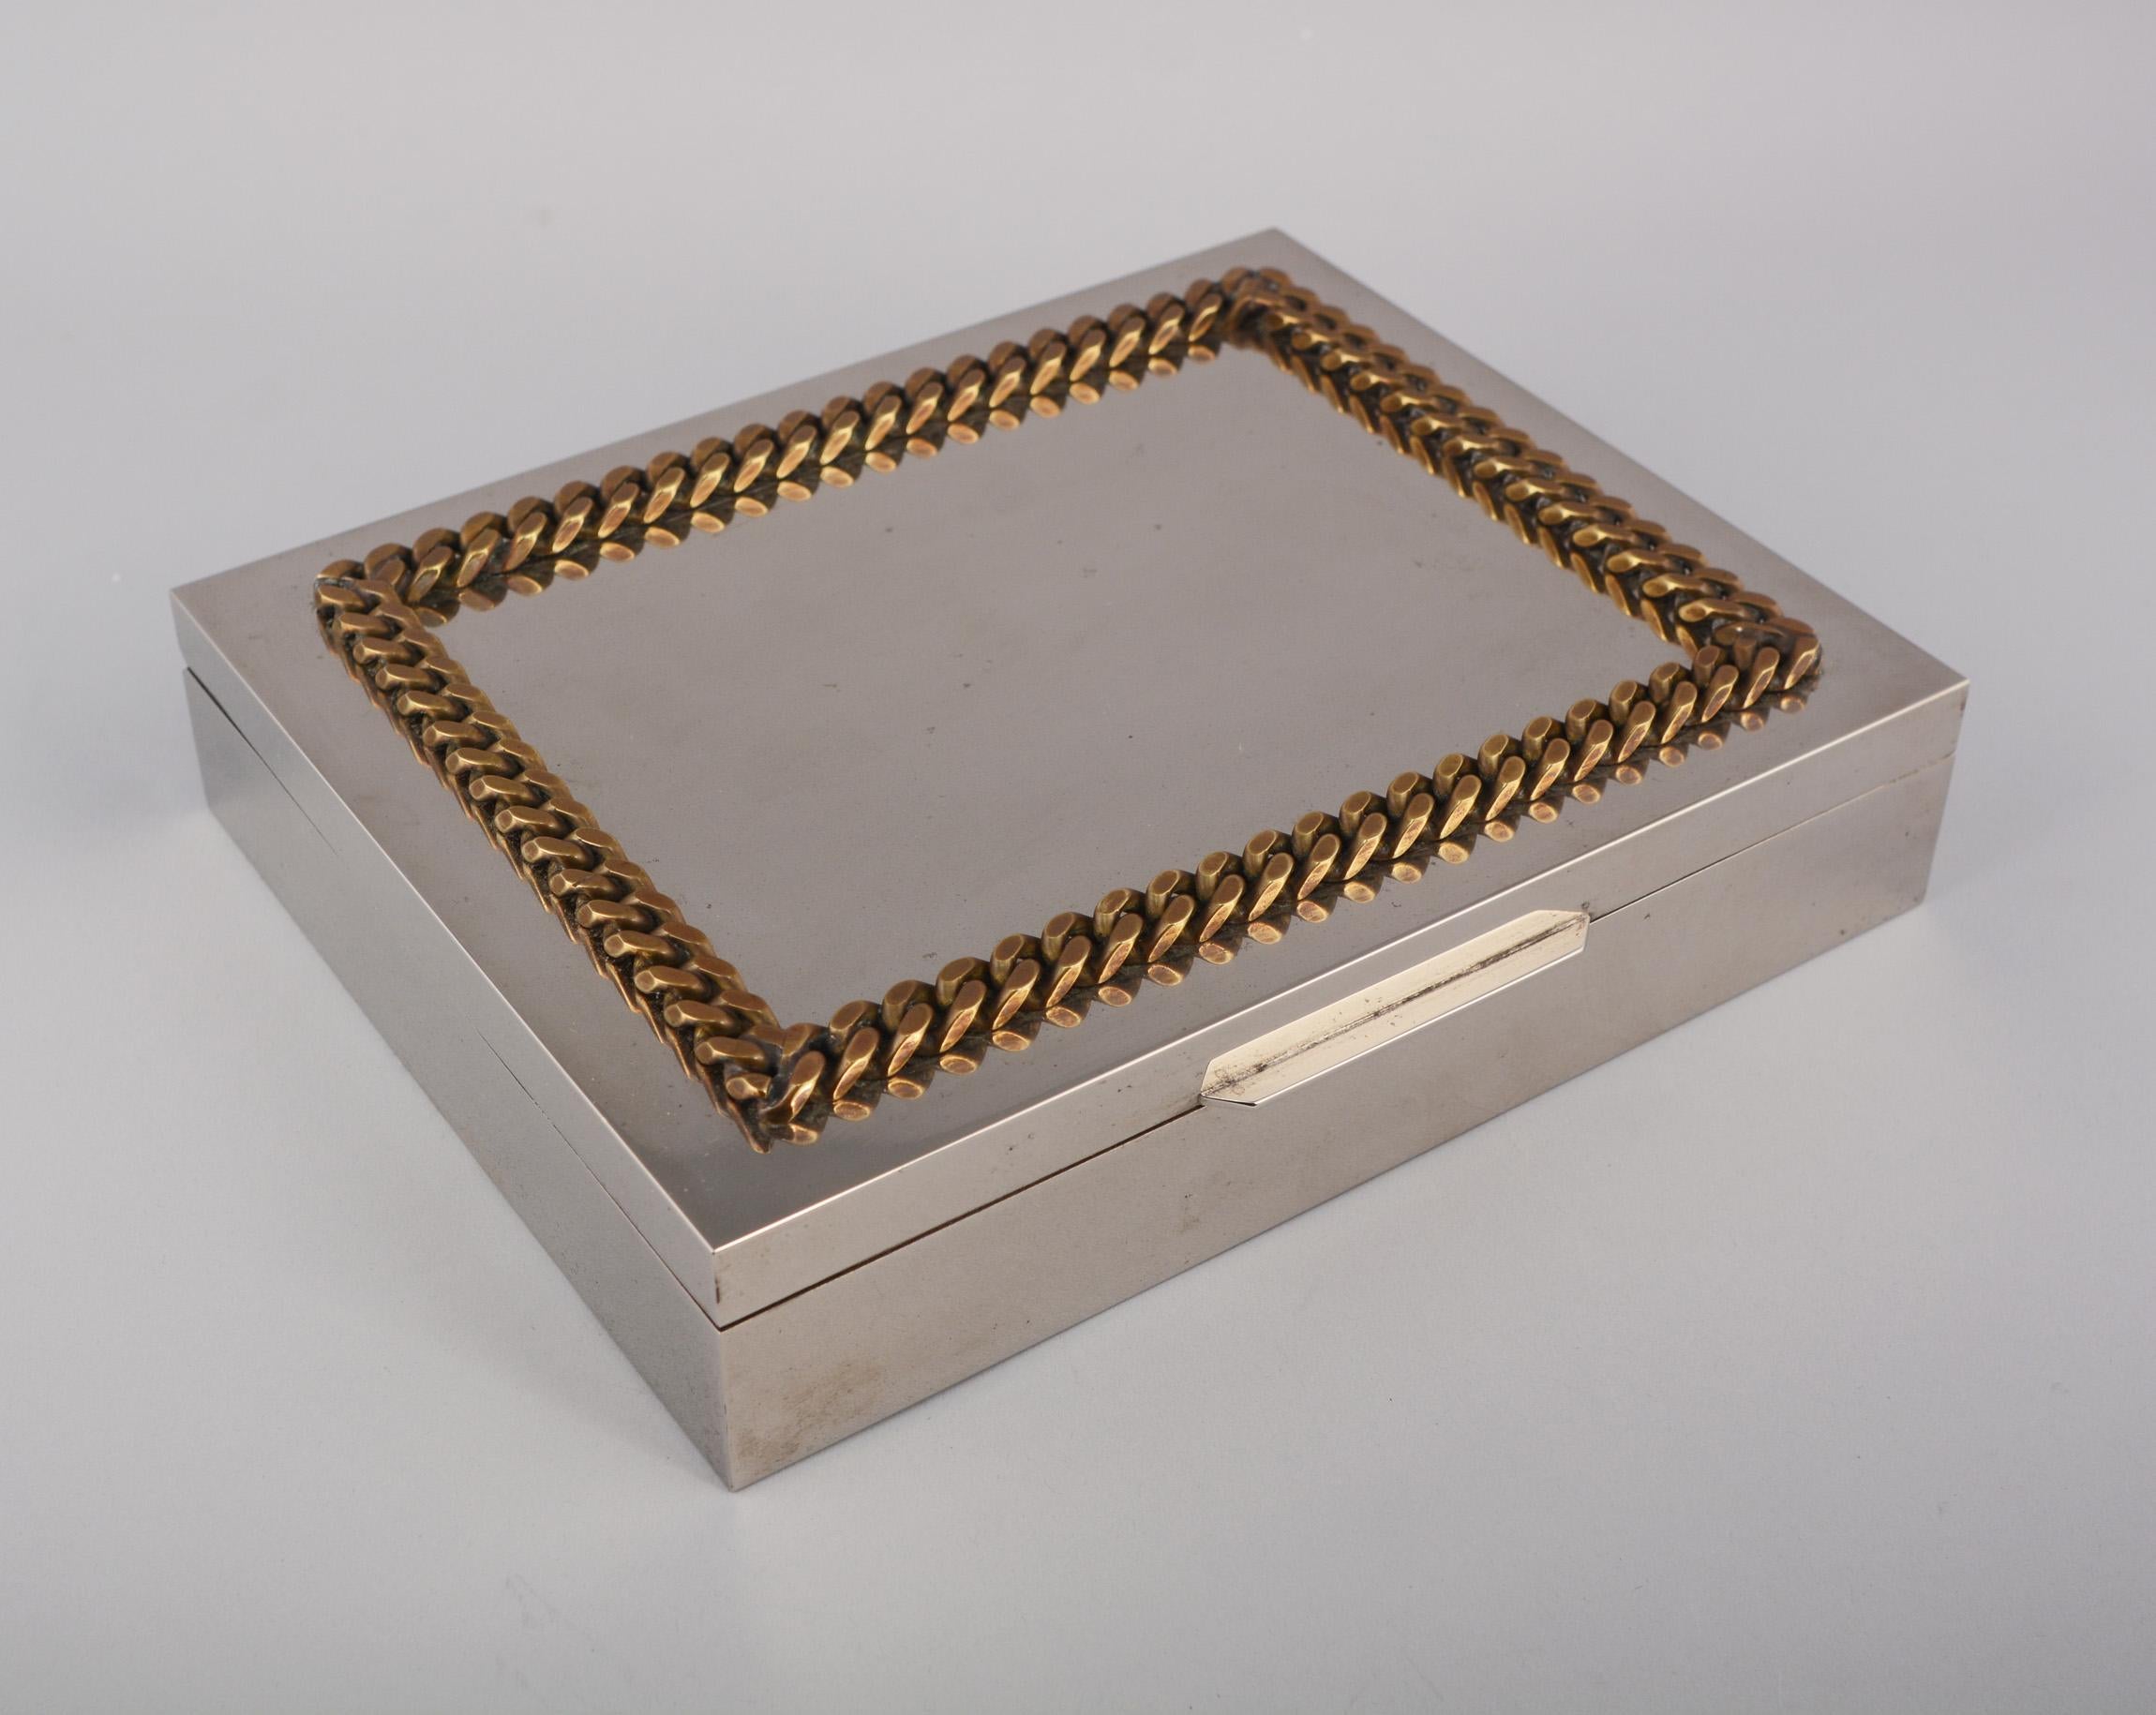 Nickel plate cigar or trinket box with satinwood lined interior. This has a heavy brass chain around the top of the lid. The box retains a made in Italy label on the bottom. The interior compartments are 6 7/8 inches by 4 3/8 inches. This has a few